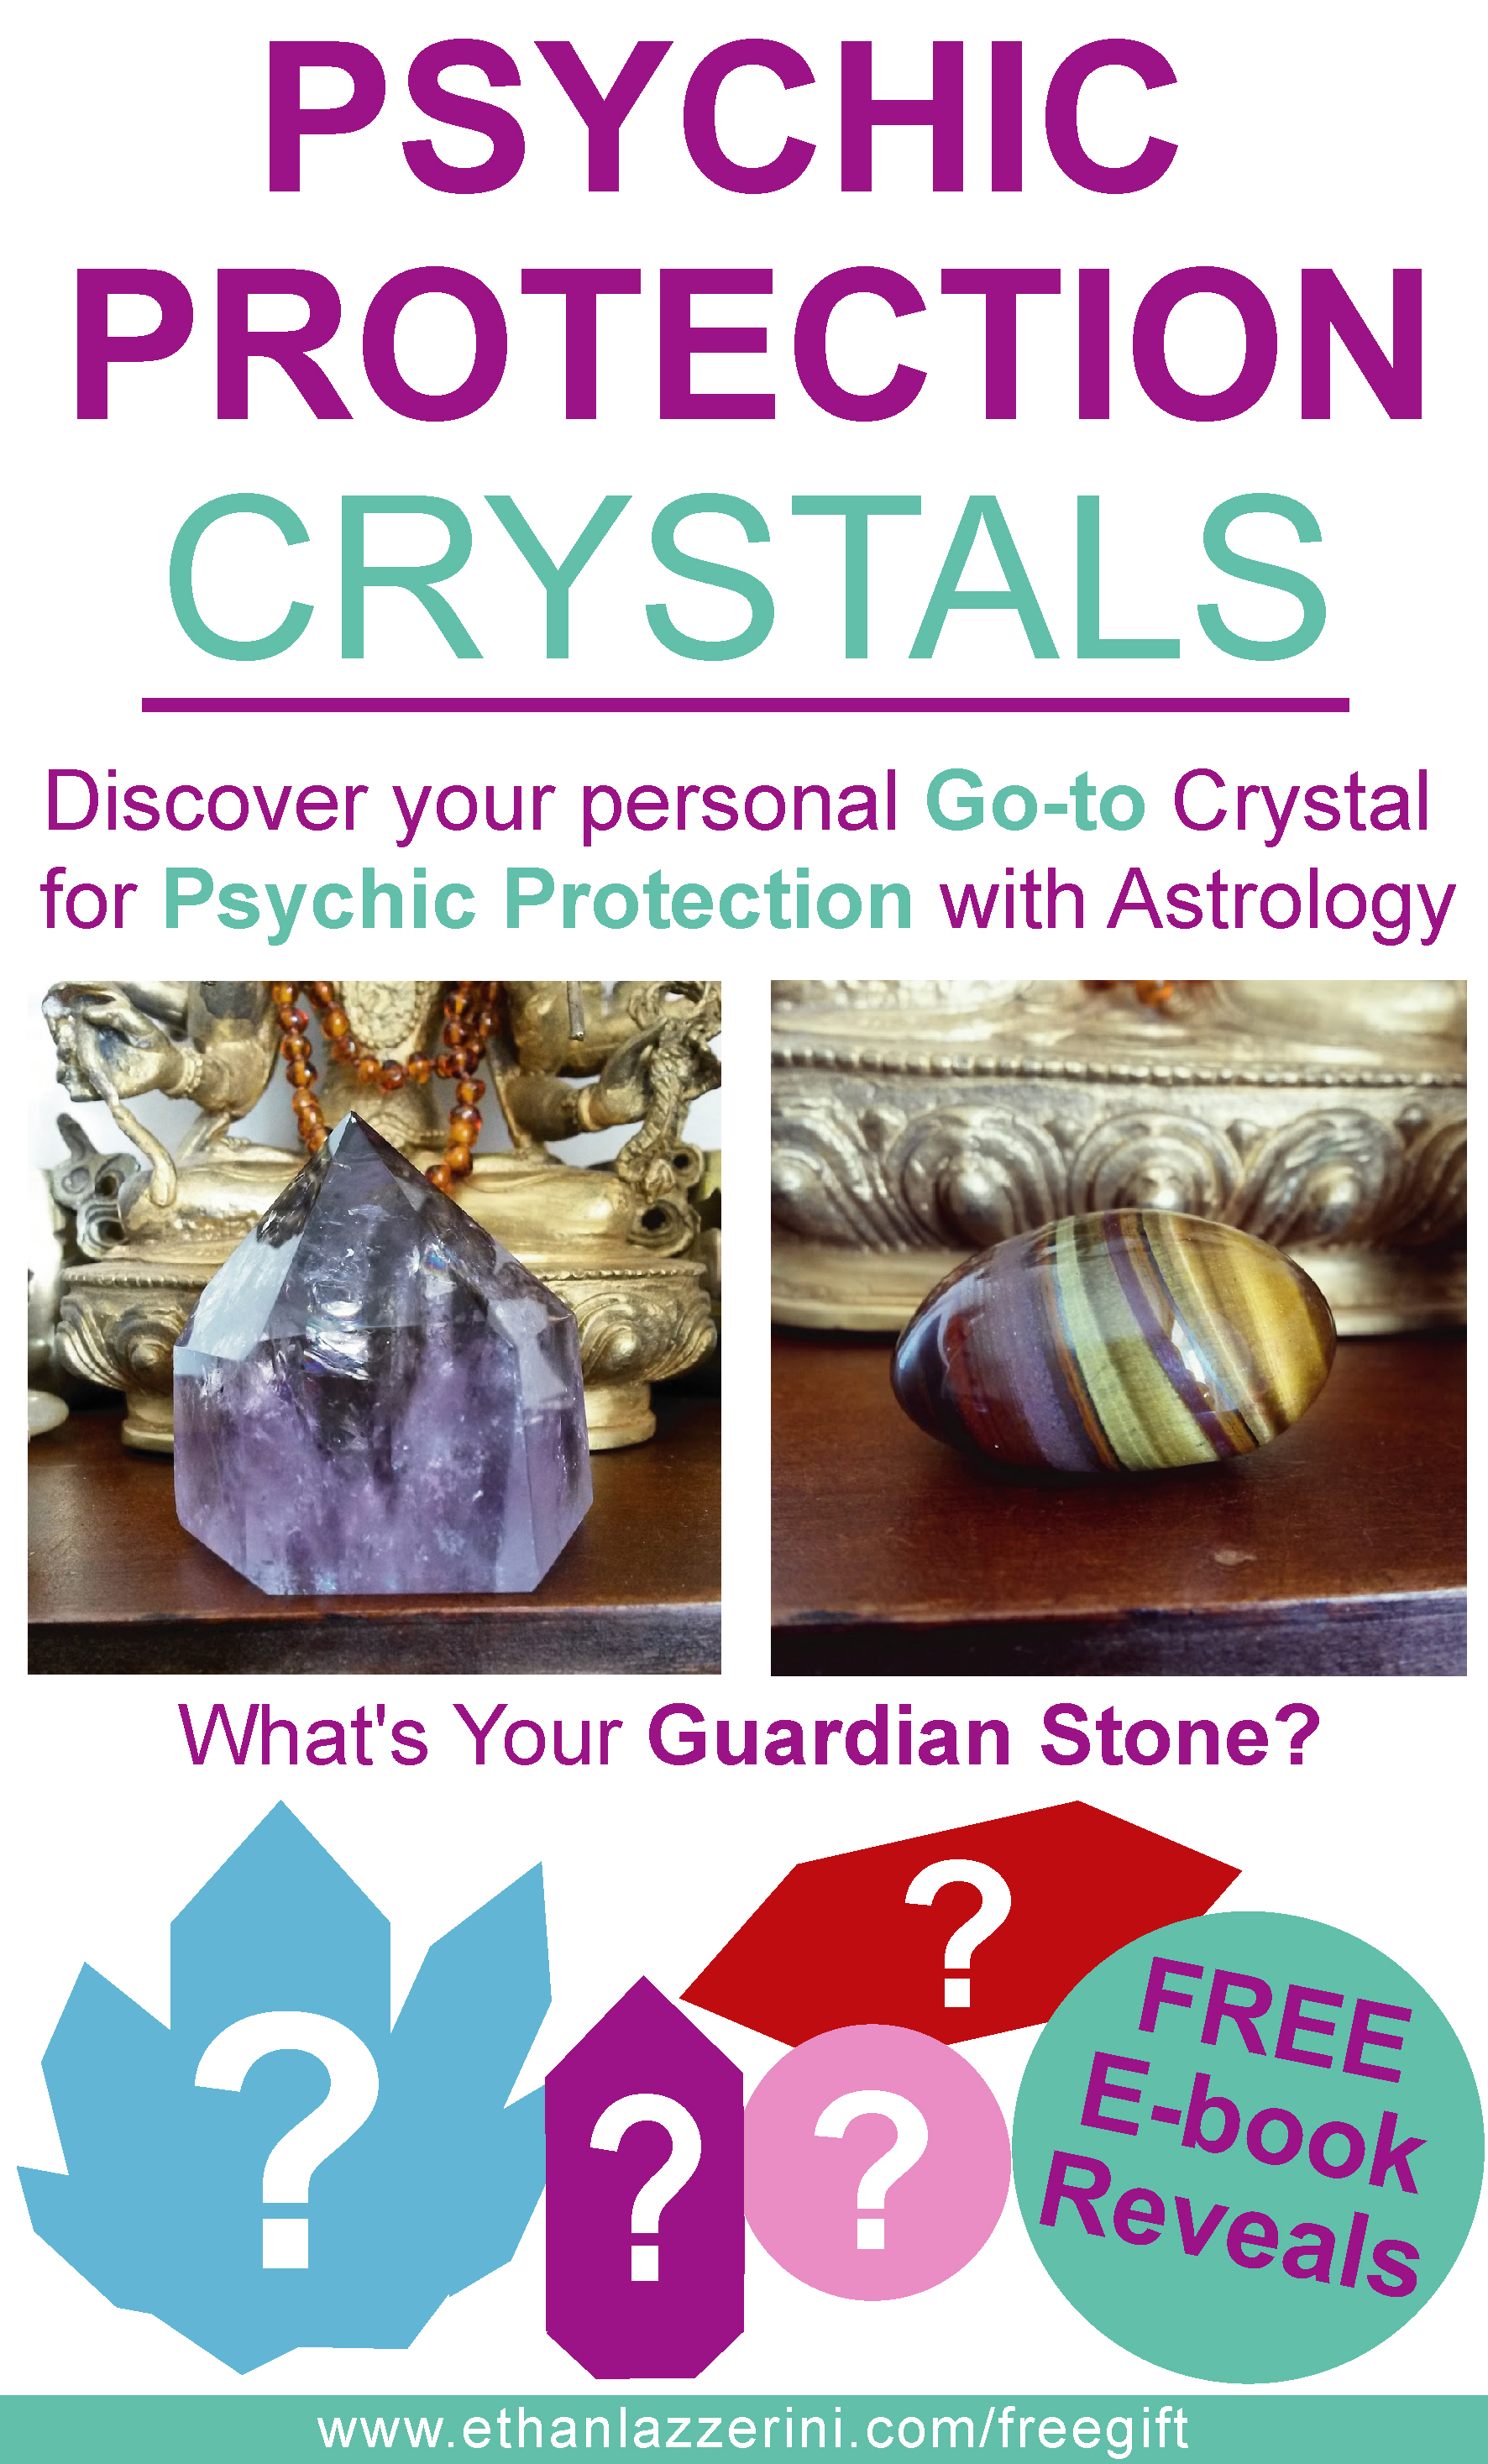 Discover the Best Psychic Protection Crystals for Your Energy!